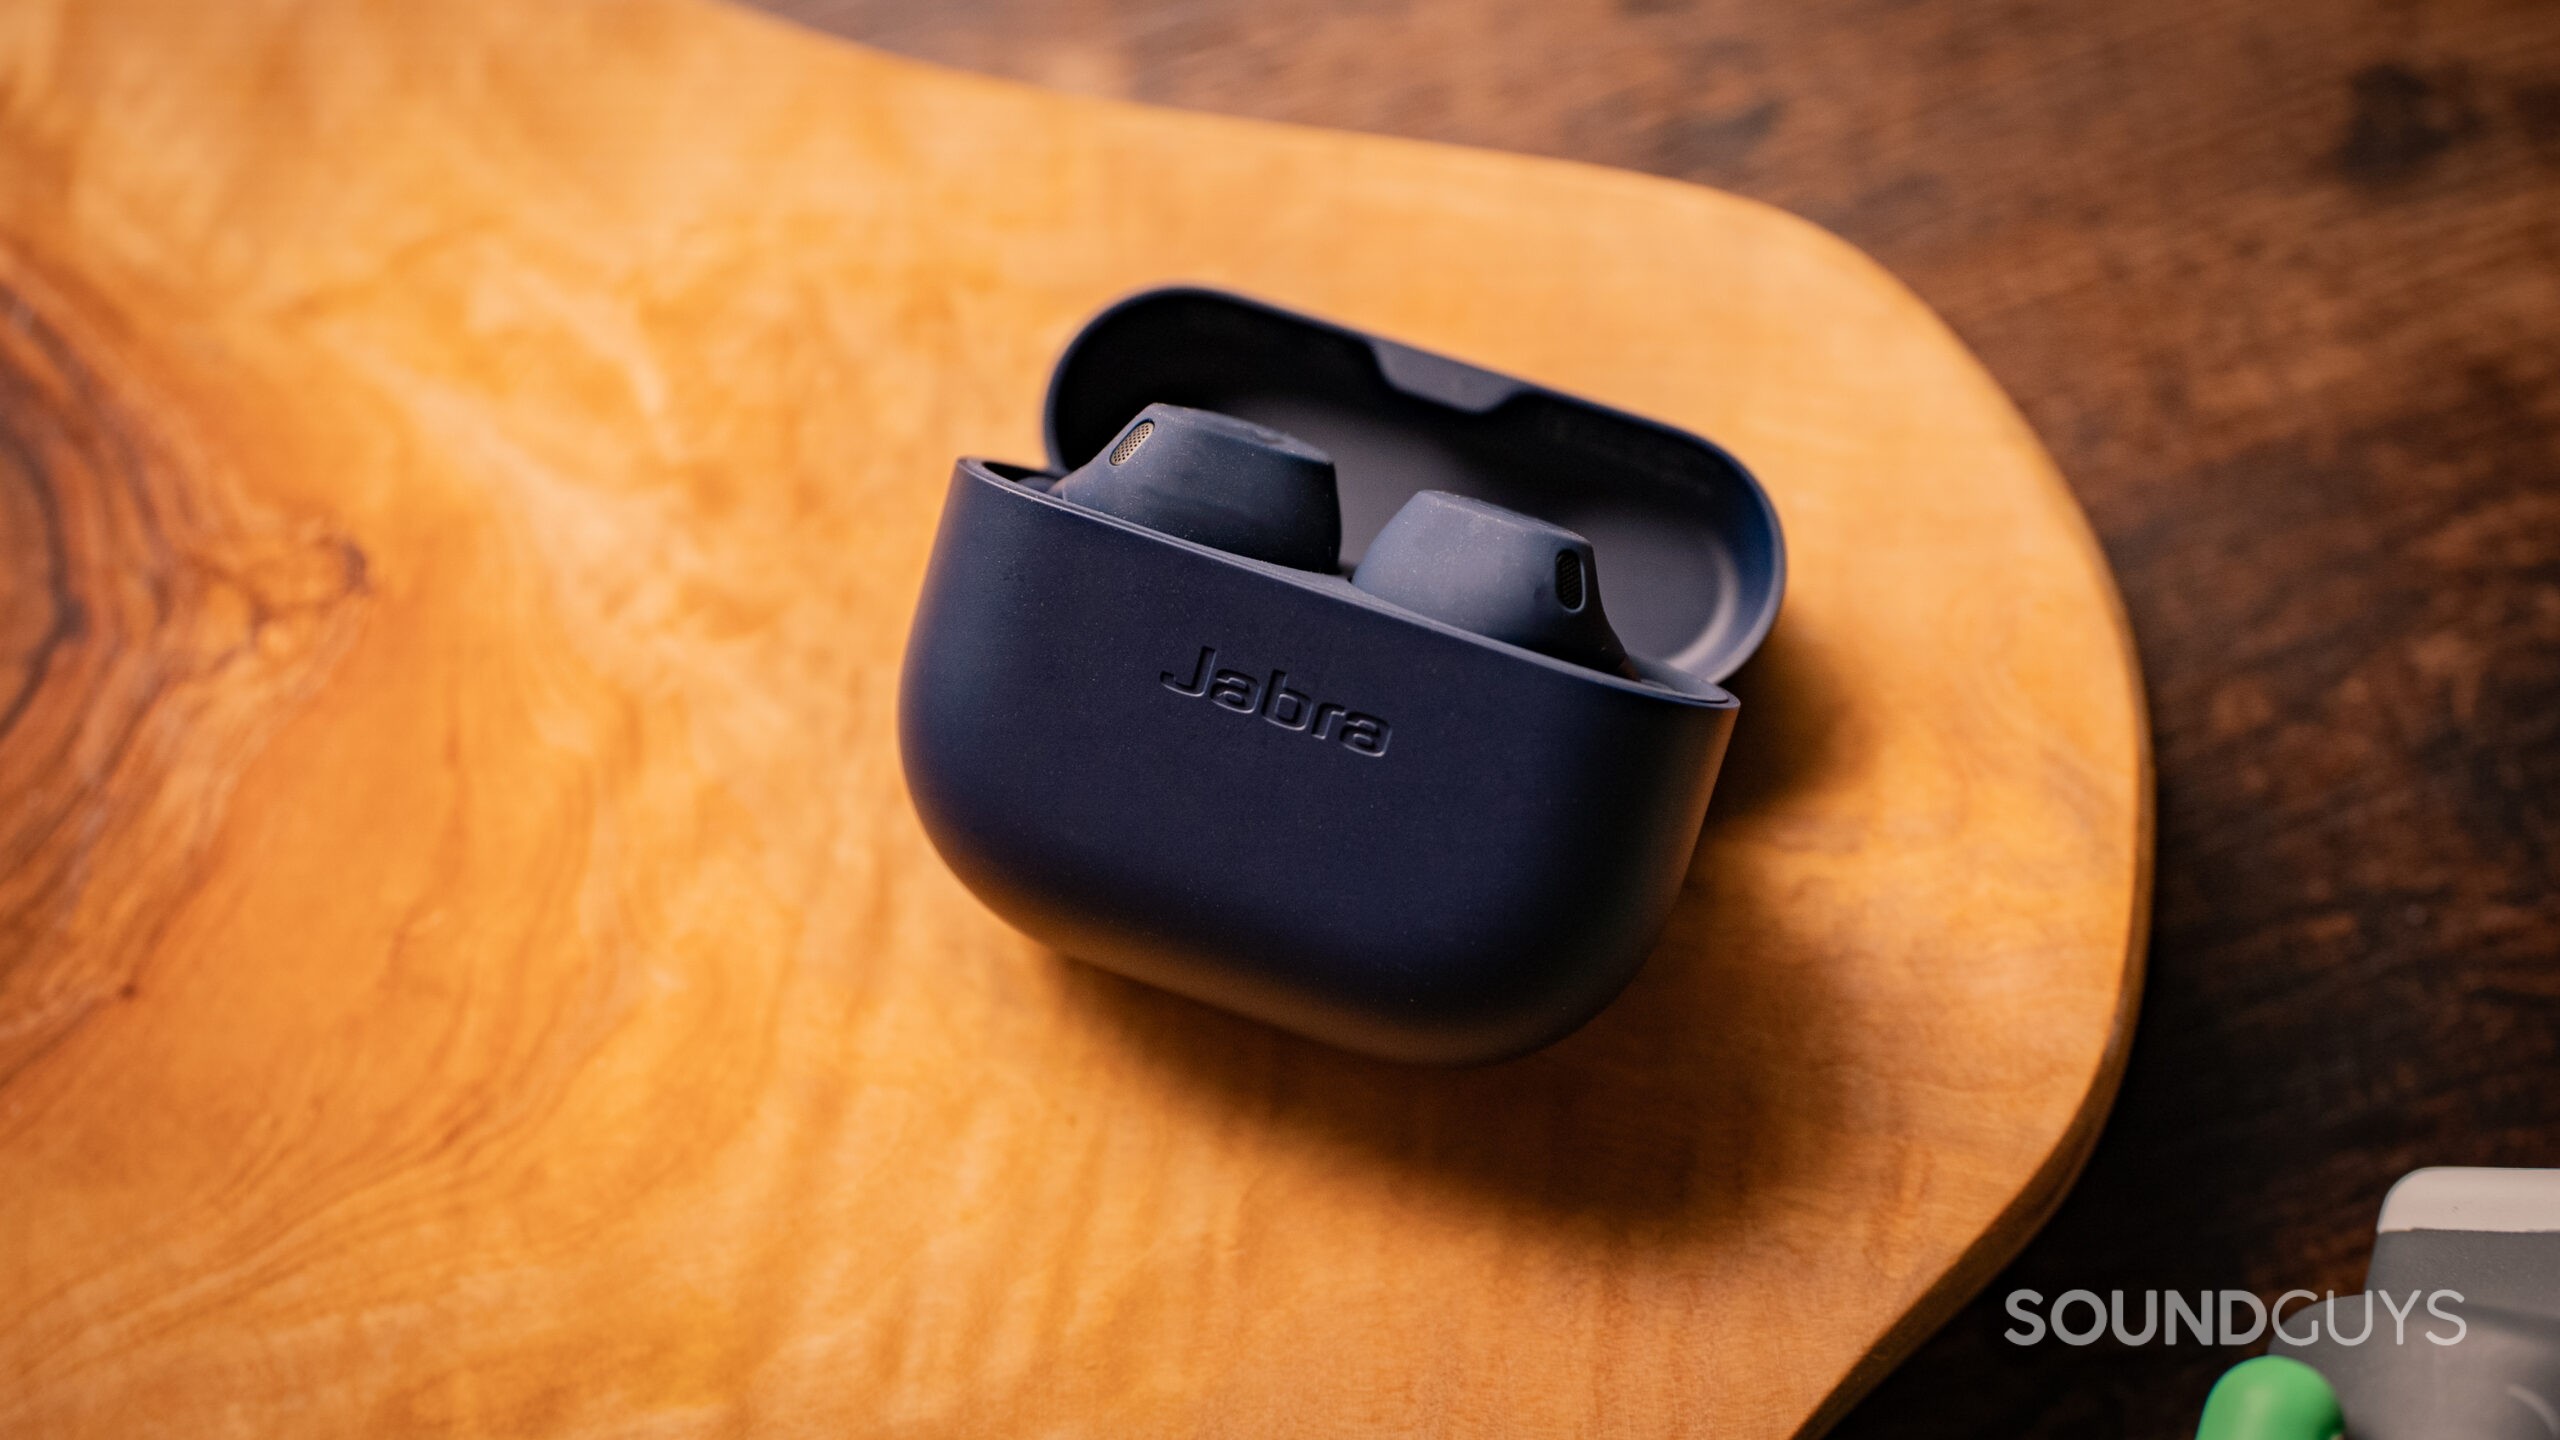 The Jabra Elite 8 Active shown with the lid open propping up the case.